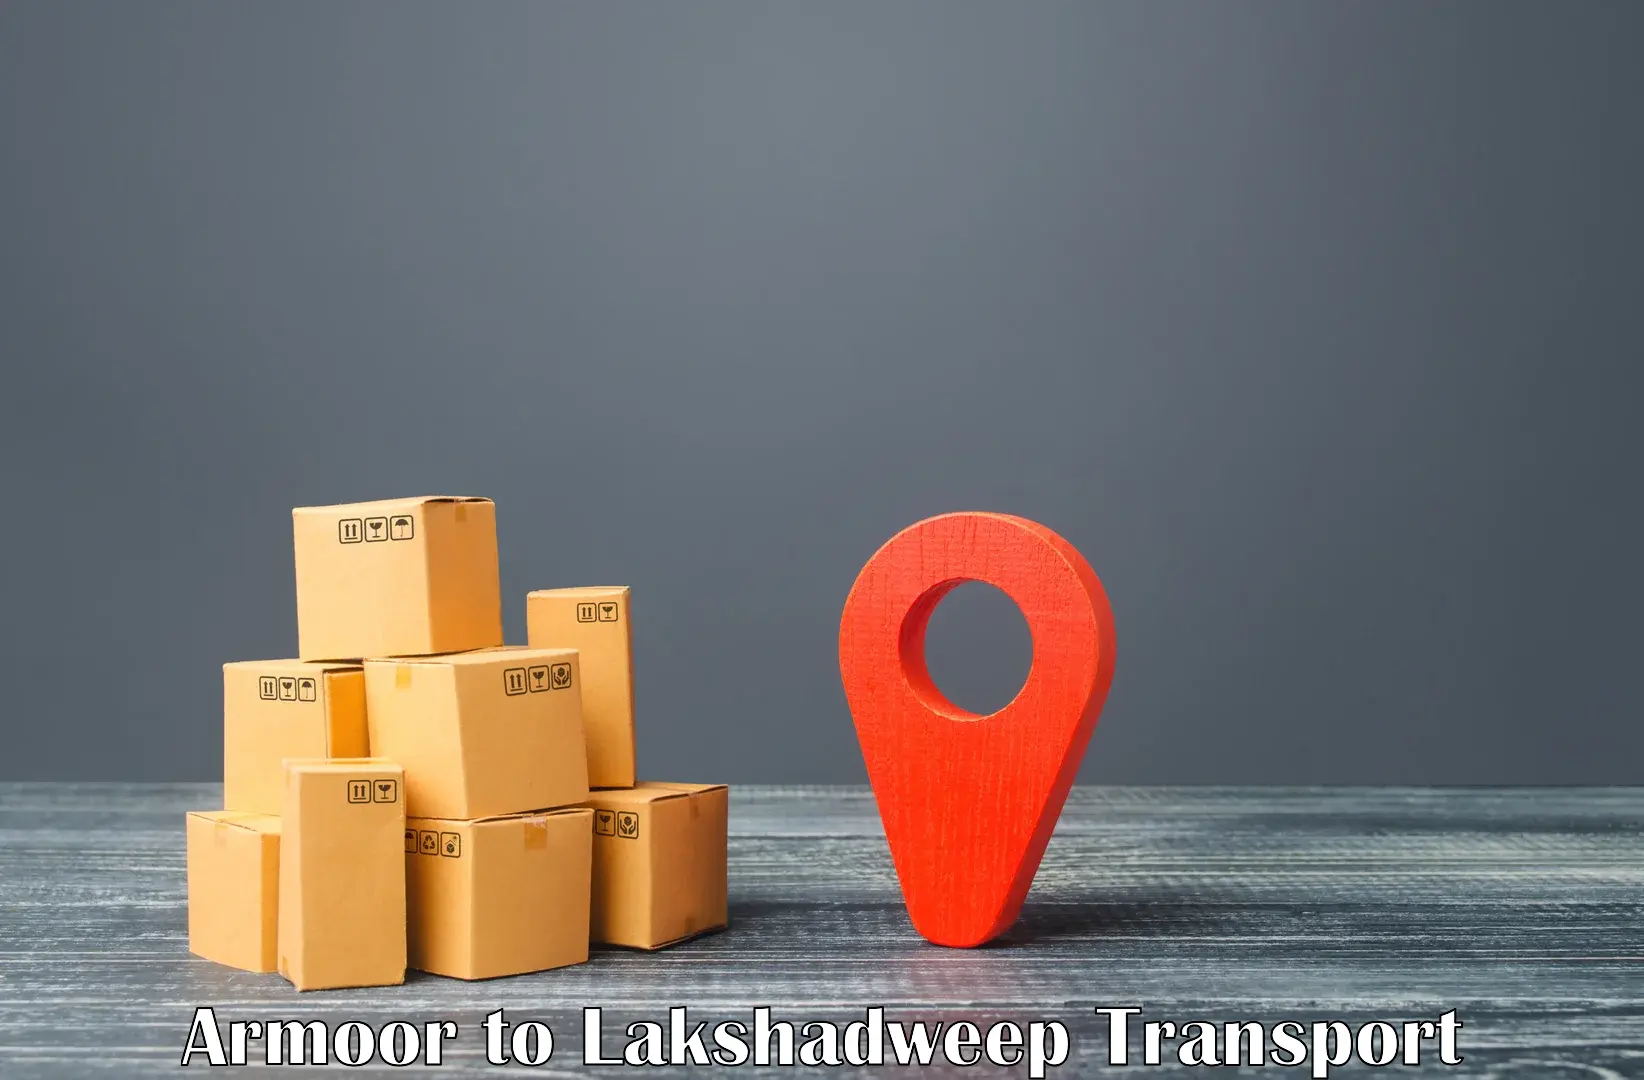 Shipping services Armoor to Lakshadweep